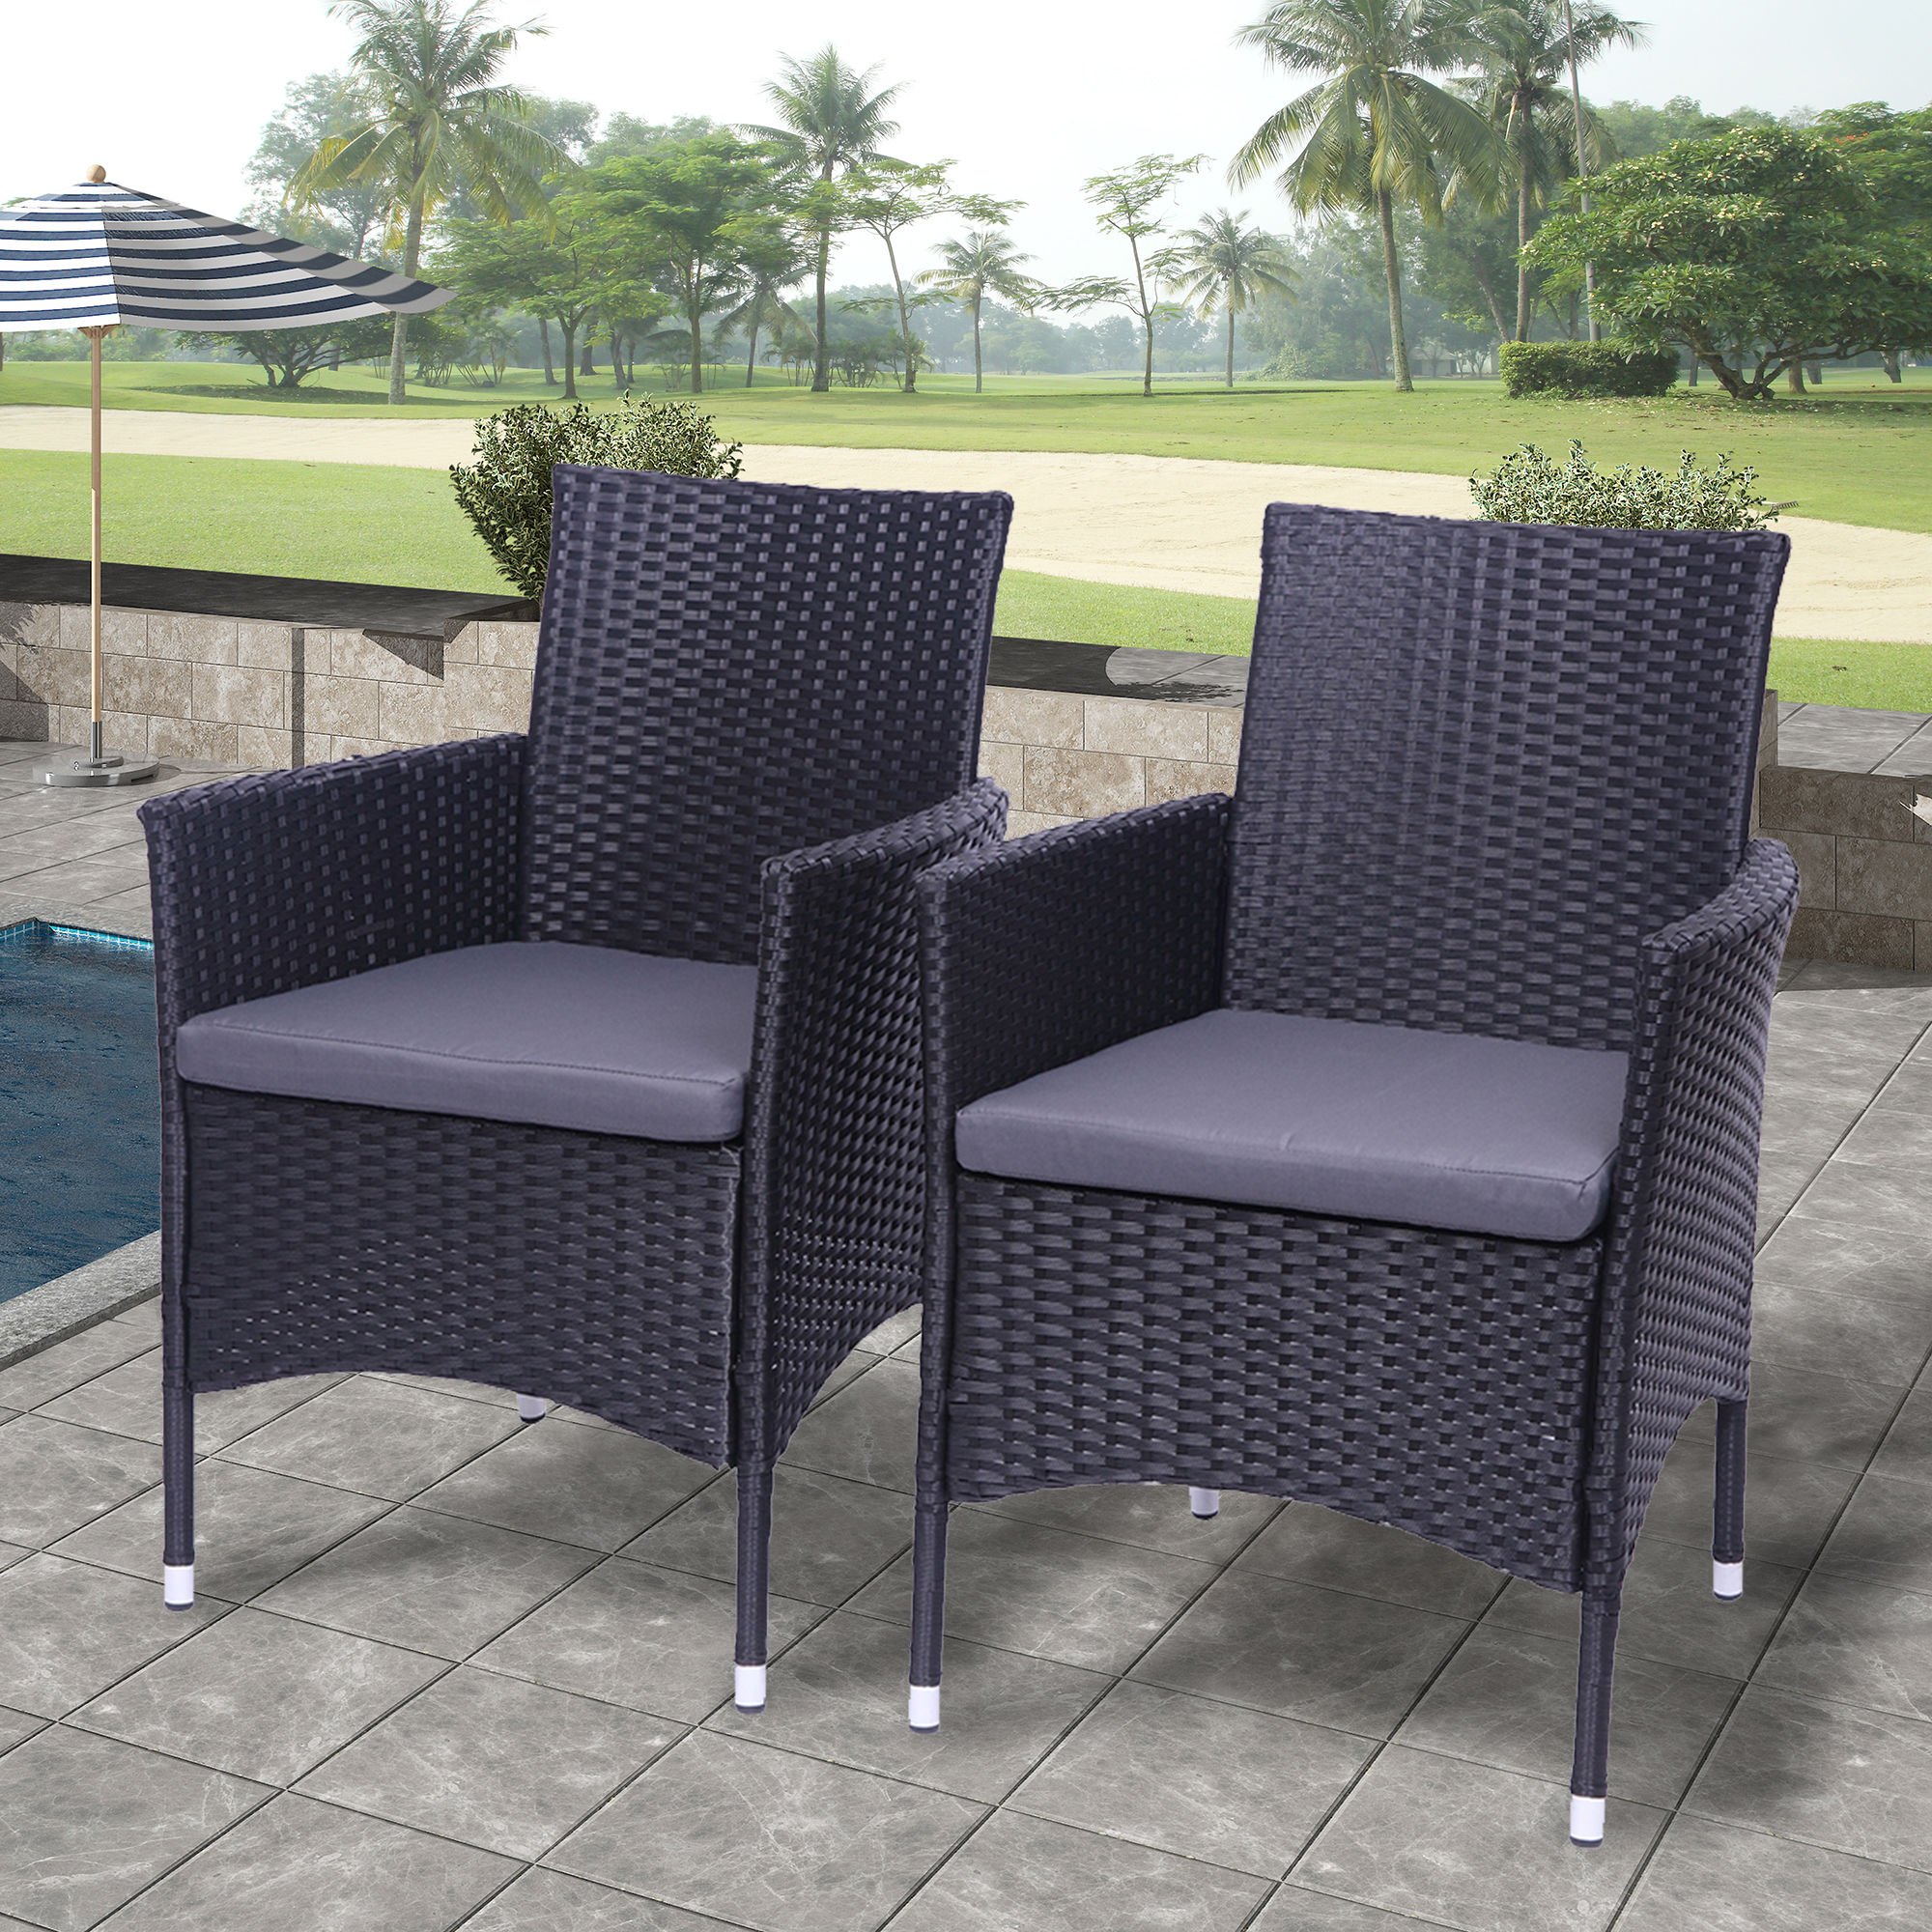 Patio Chairs Set of 2, BTMWAY All-Weather Wicker Patio Furniture Set, Heavy Duty Rattan Bistro Chairs Conversation Set, Front Porch Furniture Outdoor Chairs Set for Backyard Garden Balcony, Black - image 2 of 11